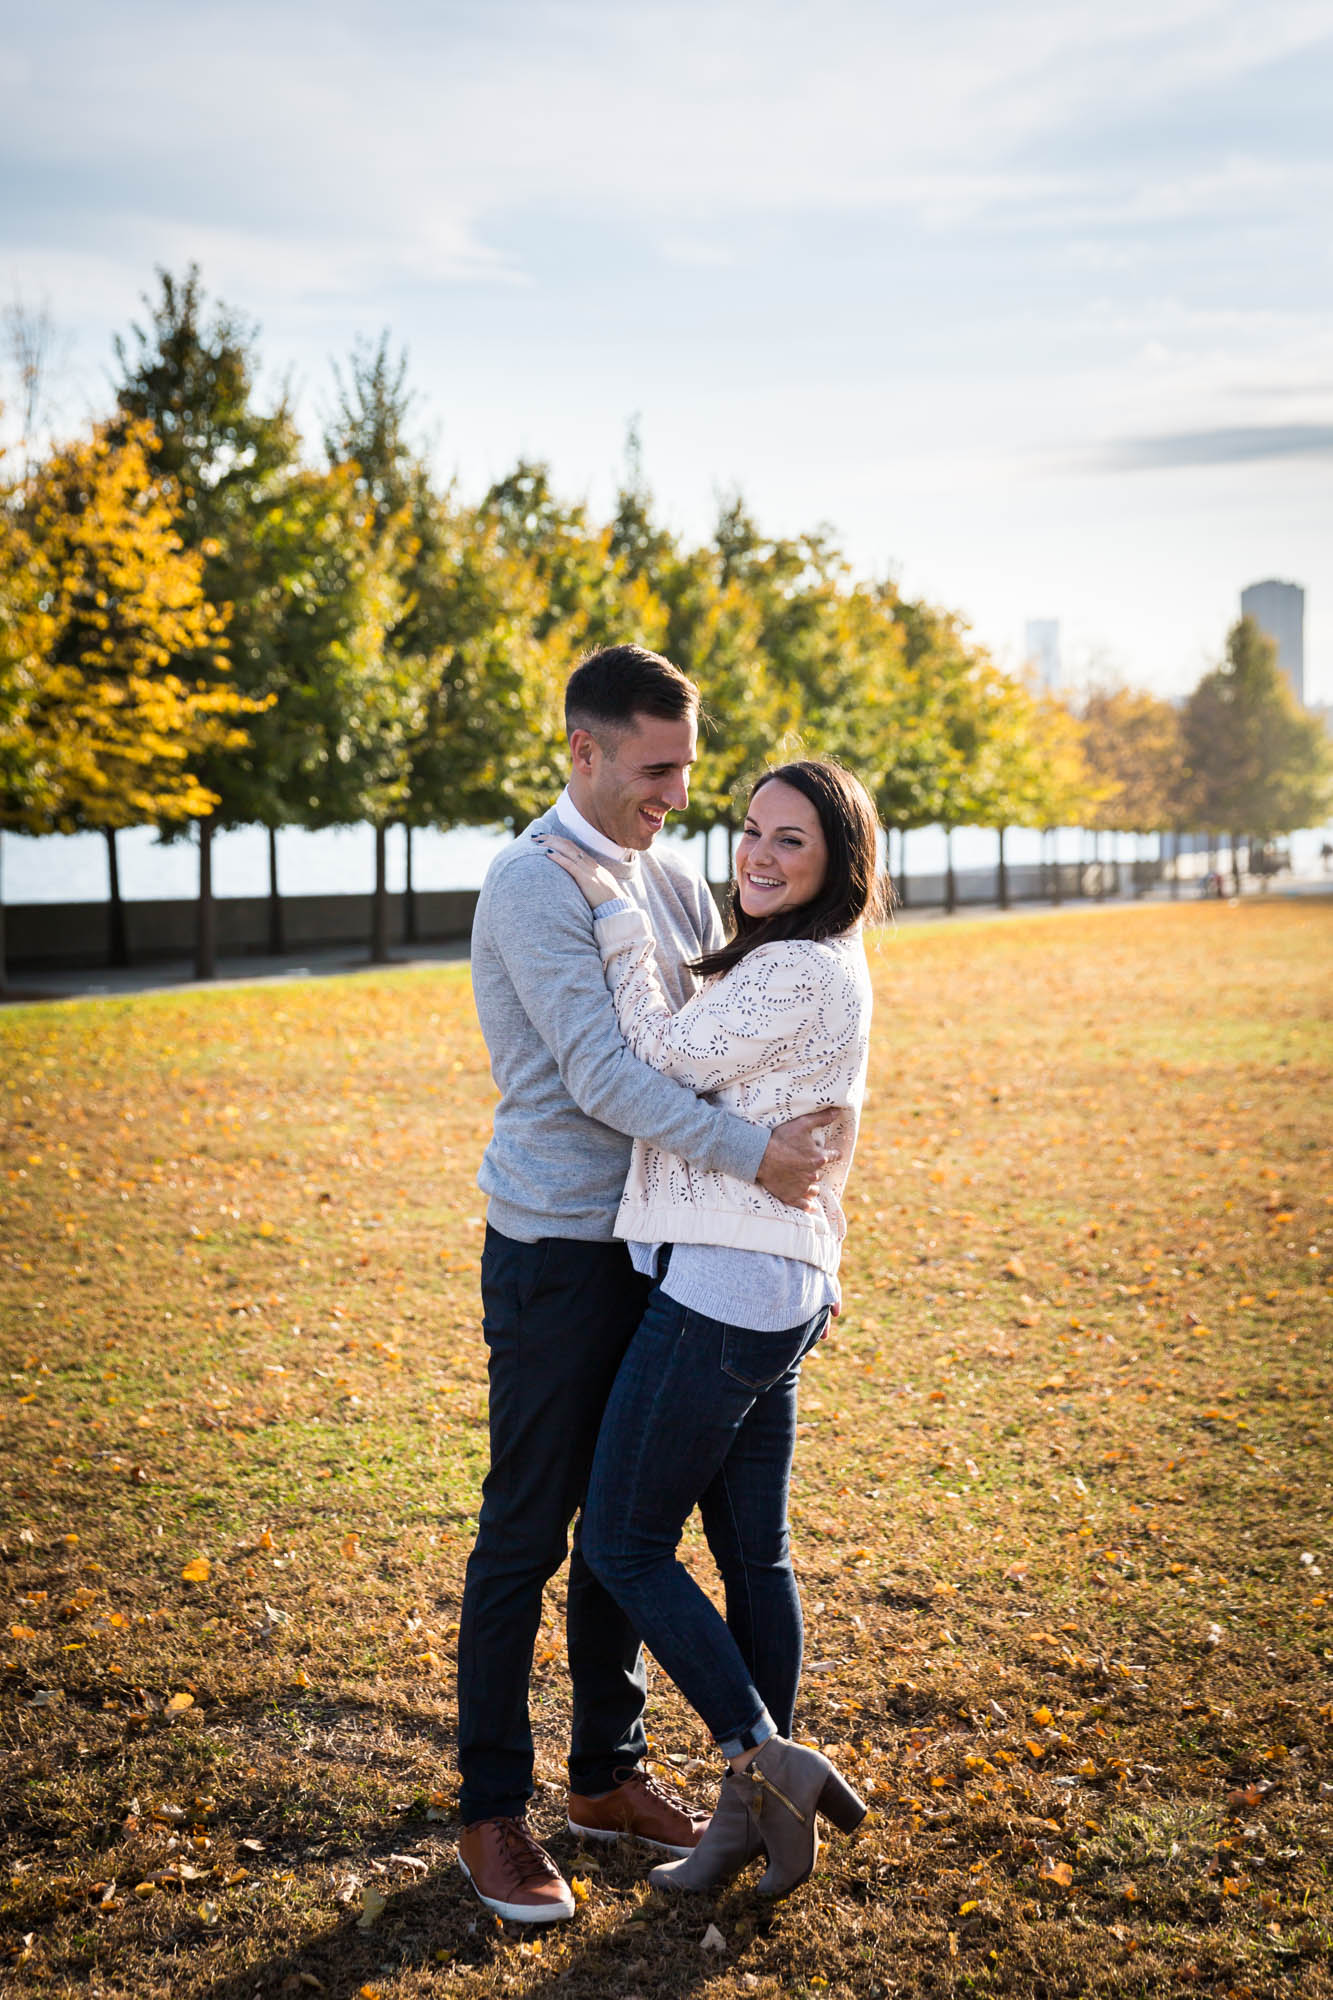 Couple hugging in front of grass and trees during a Roosevelt Island engagement photo shoot